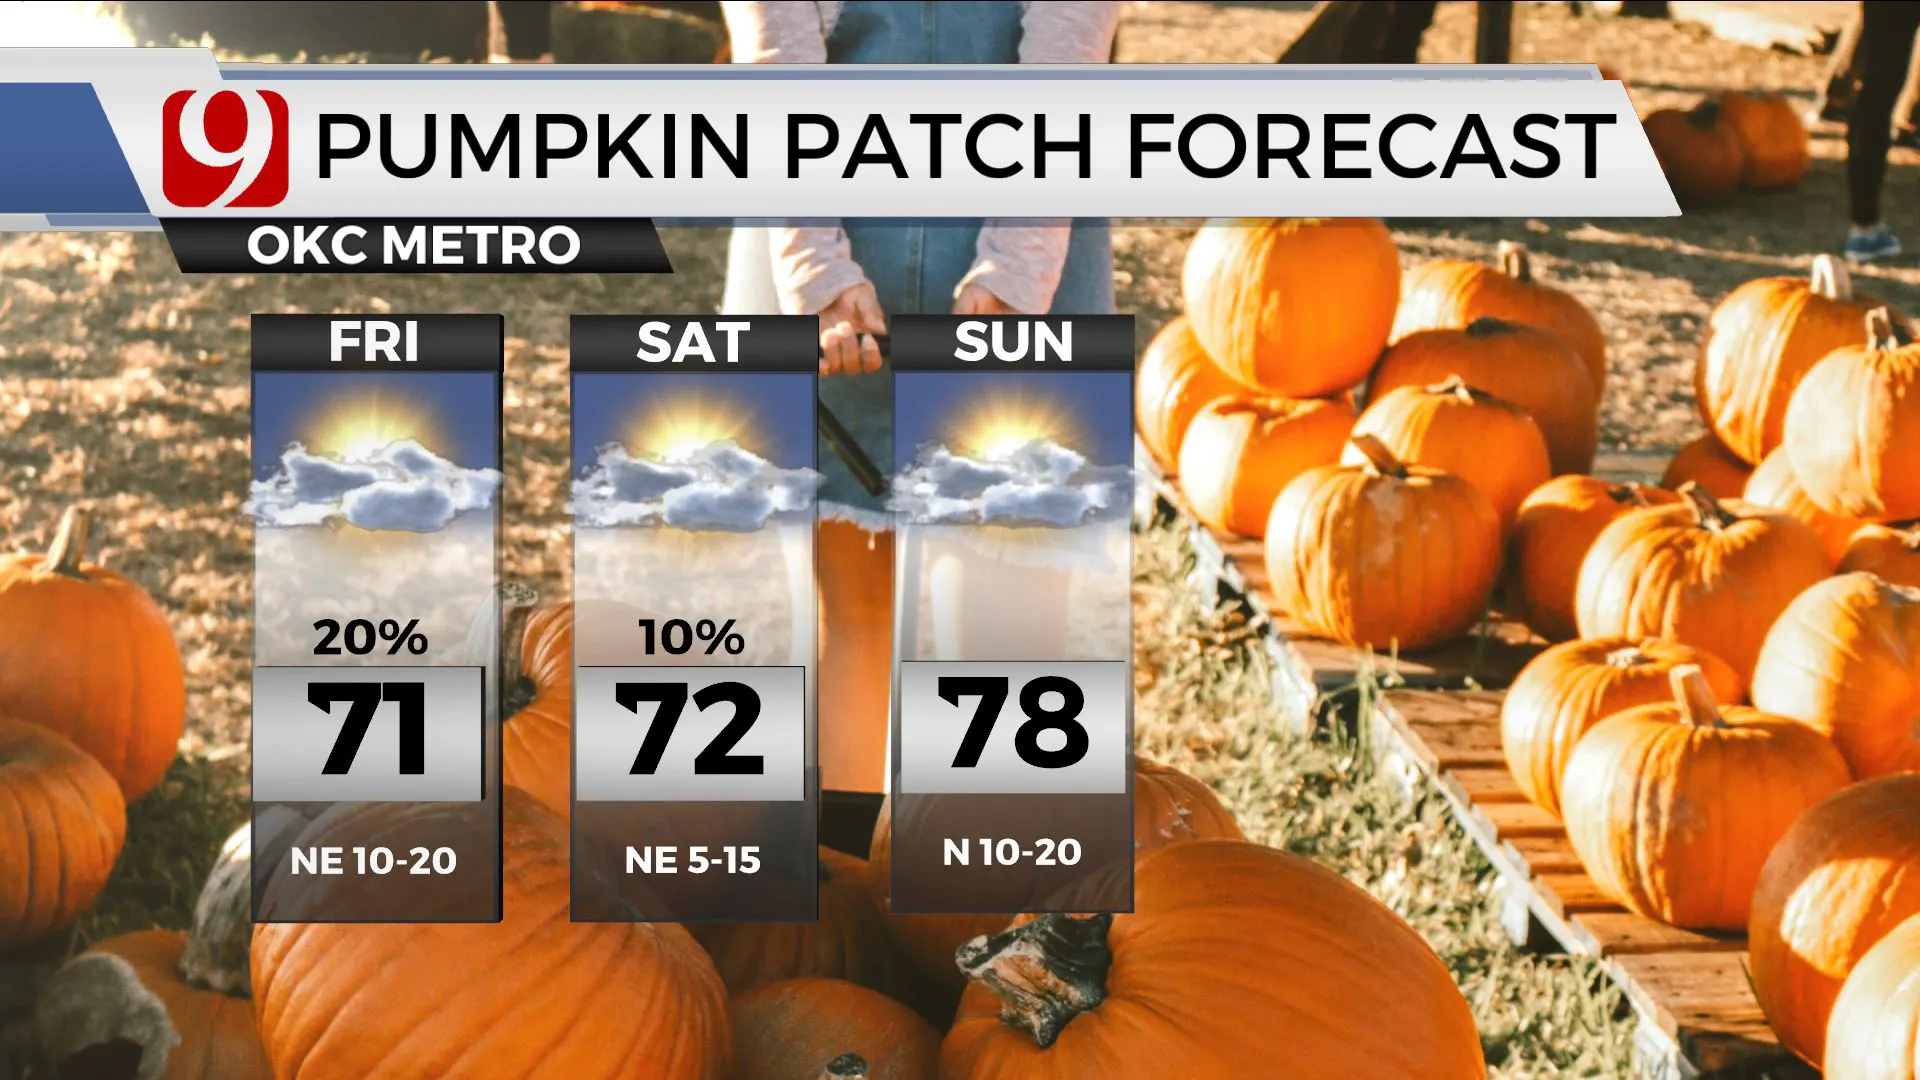 Pumpkin Patch Forecast for this weekend.